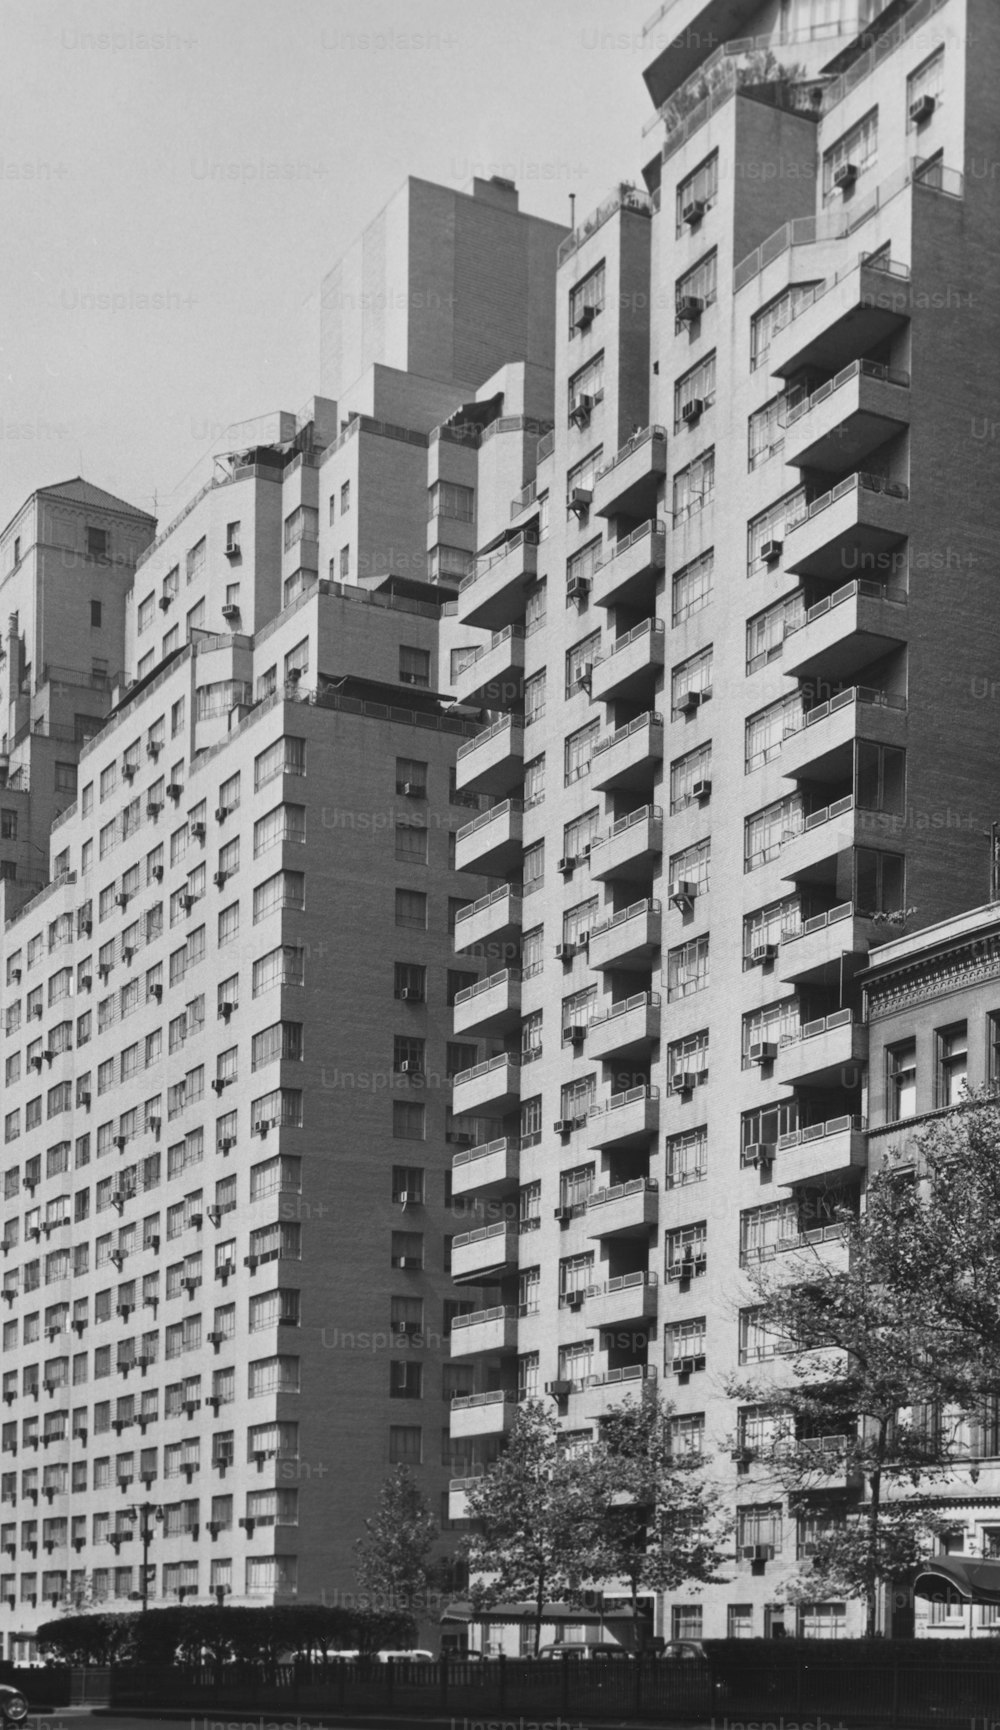 View of Block of Flats in an Unidentified Location. (Photo by George Marks/Retrofile/Getty Images)